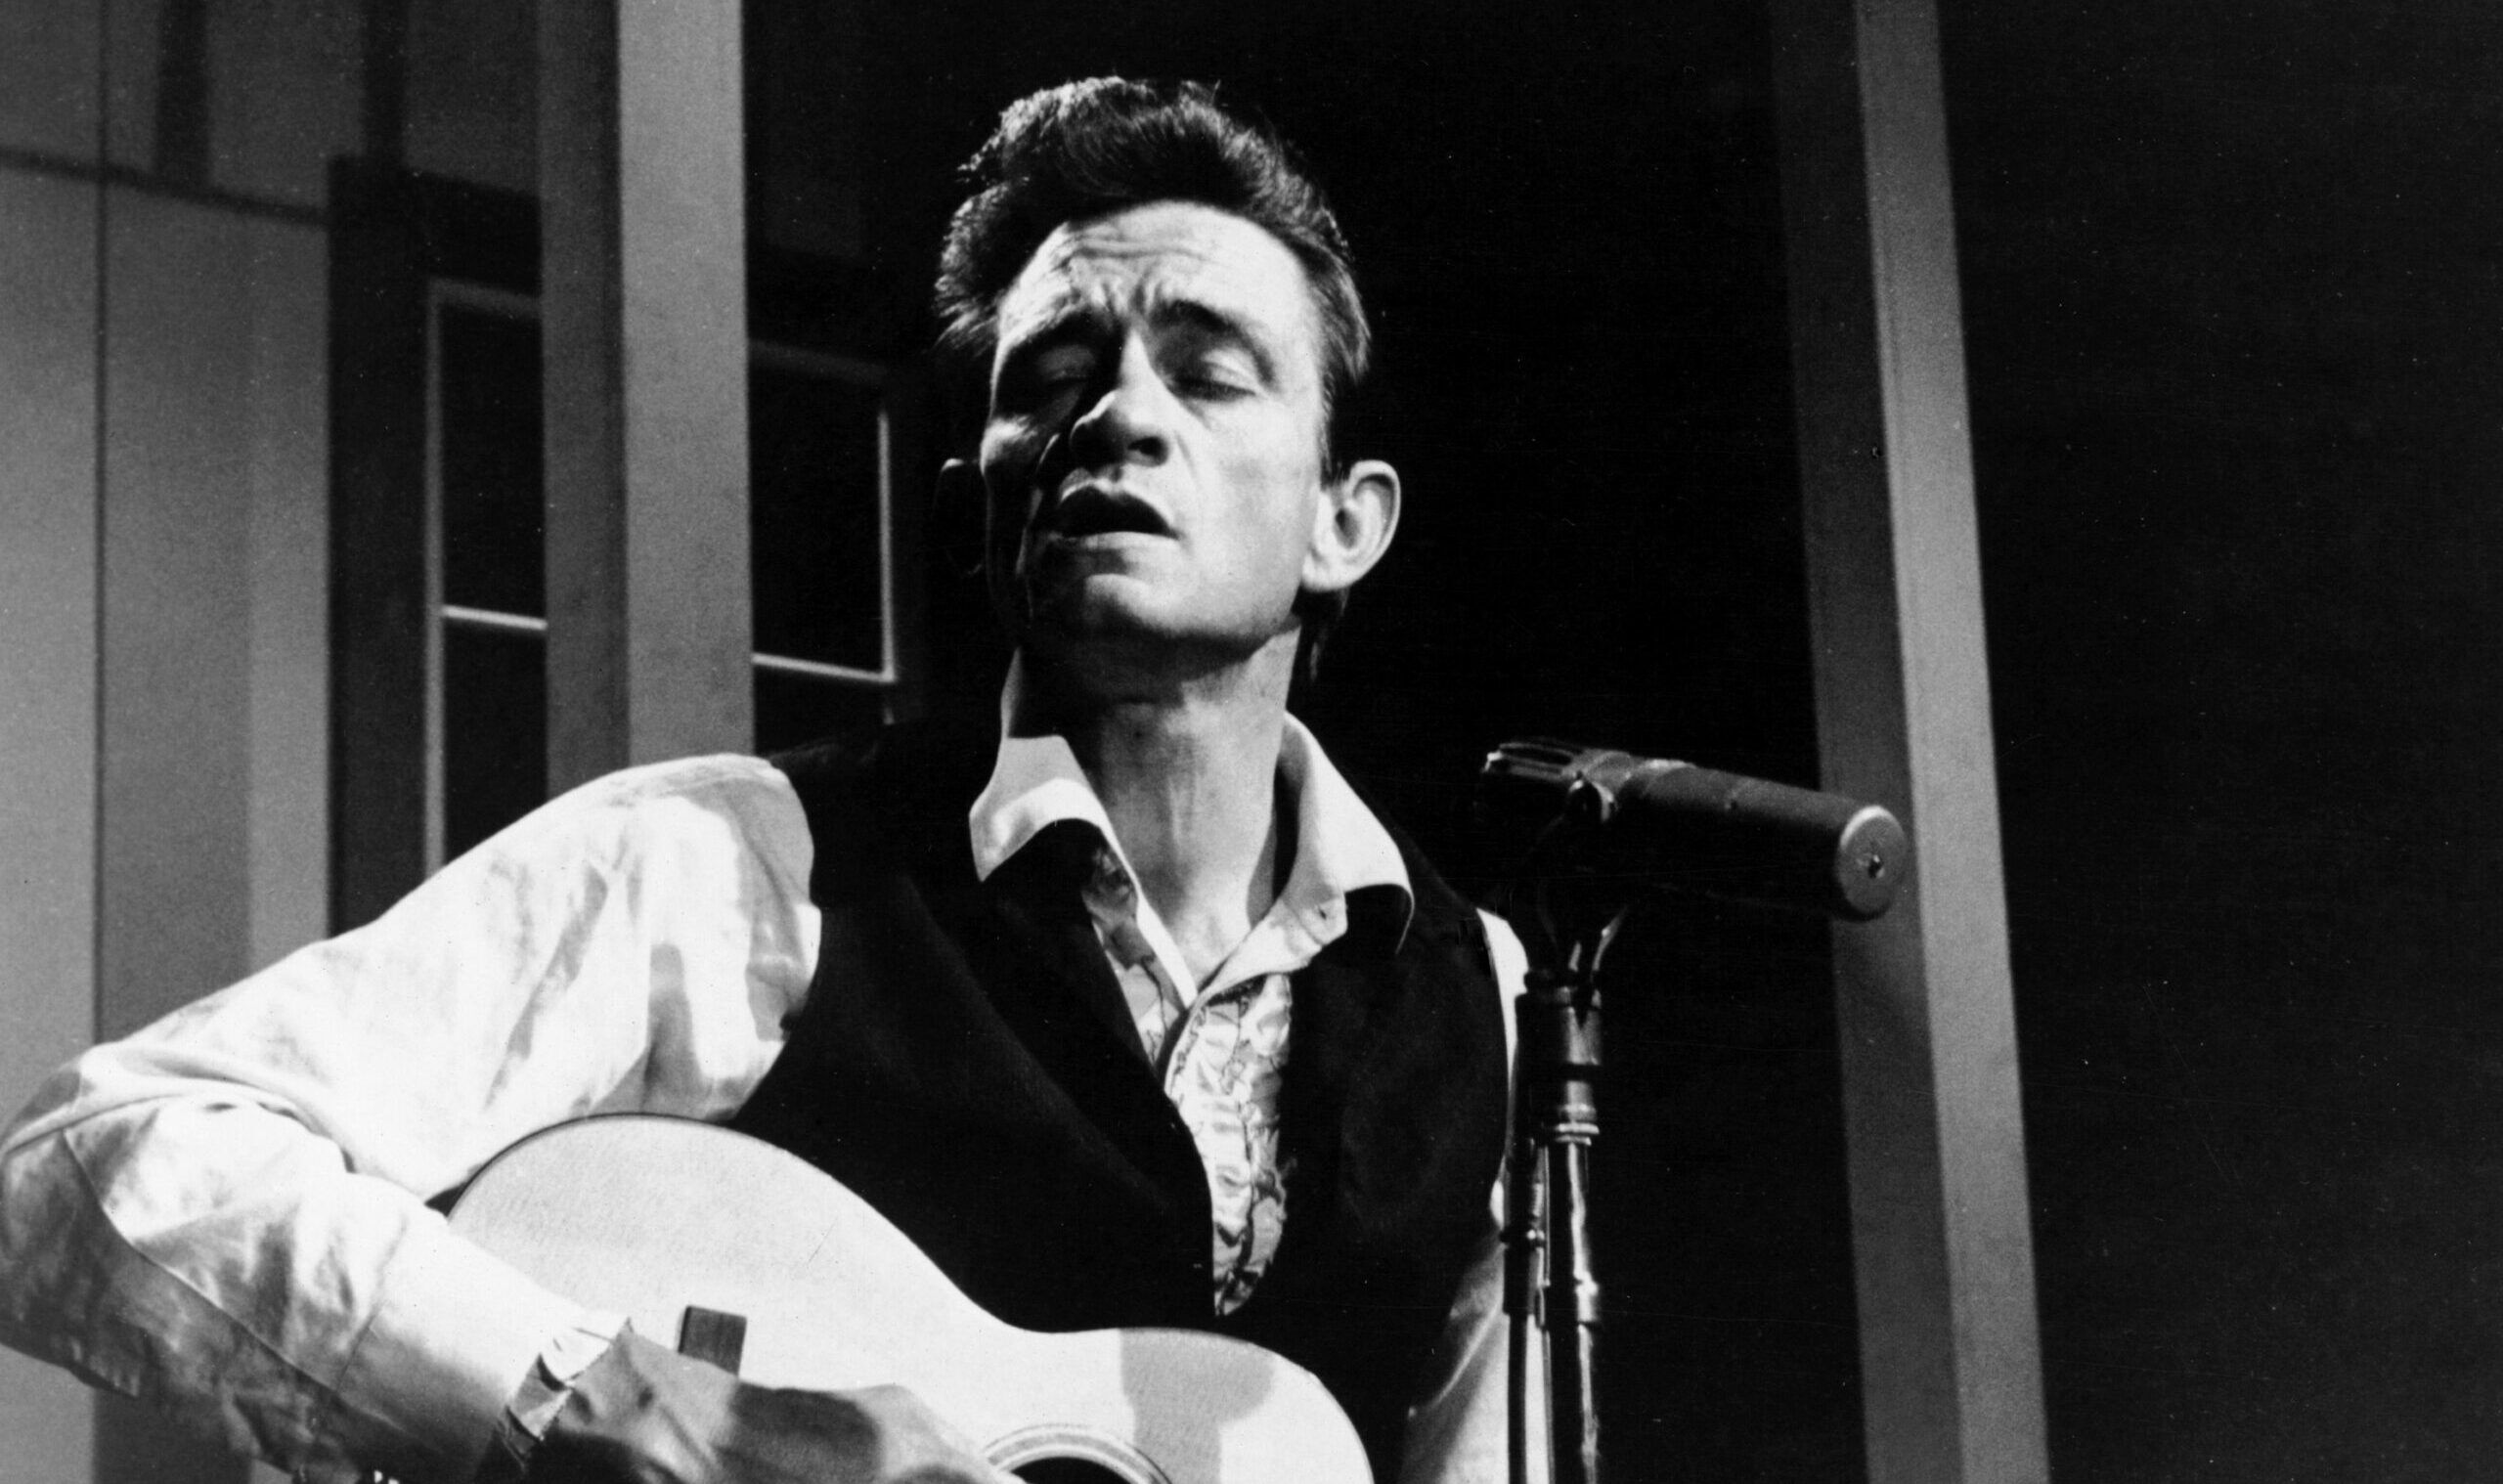 Johnny Cash to be Memorialized in U.S. Capitol